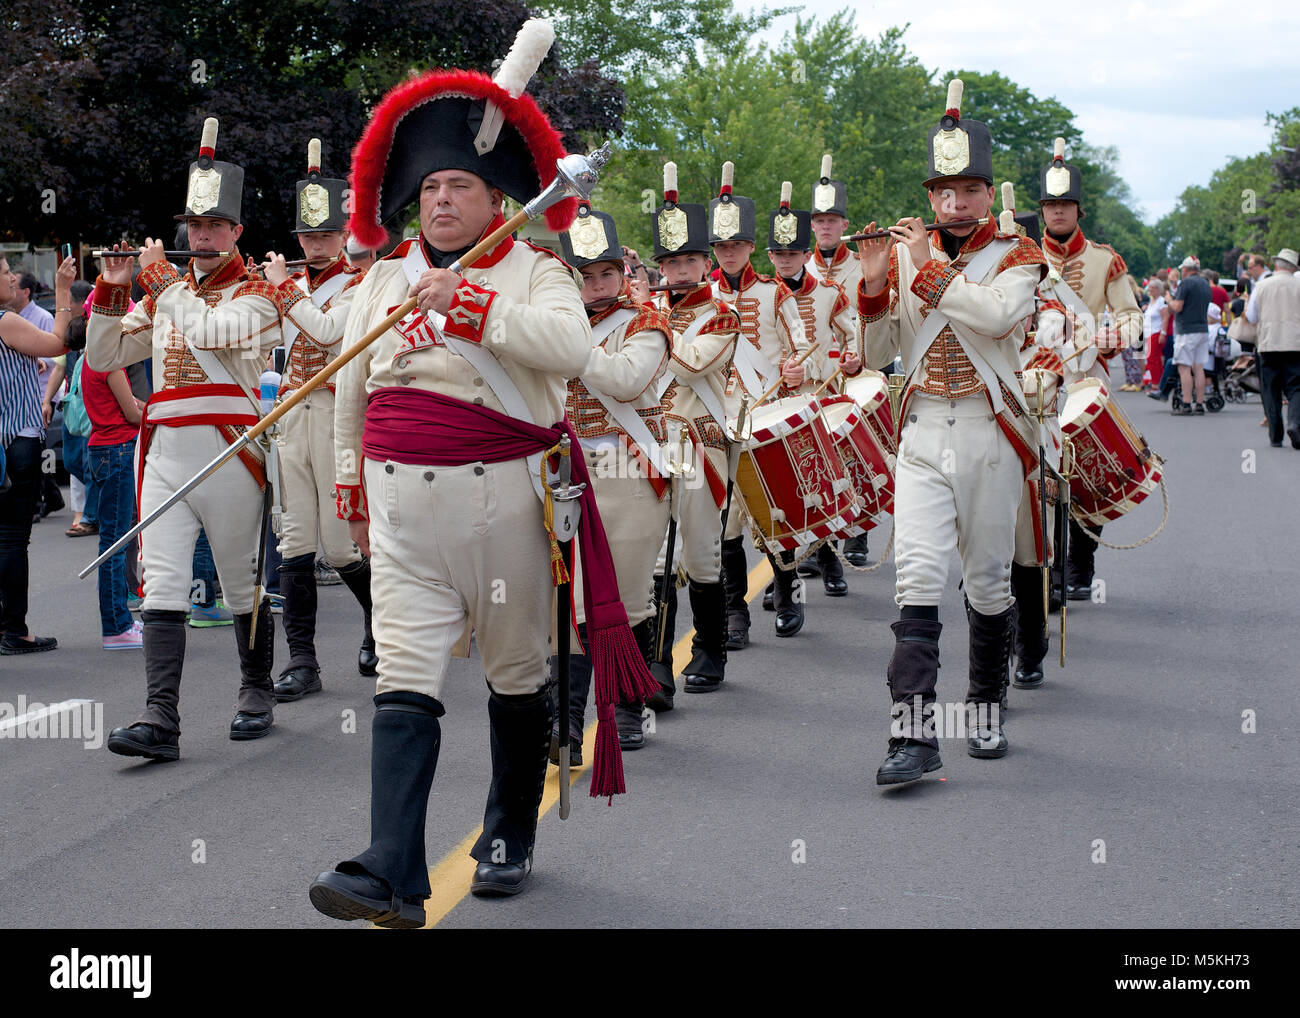 The Fort George National Historic Site Fife and Drum band marching through the streets of Niagara-on-the-Lake as part of the annual Canada Day Parade Stock Photo